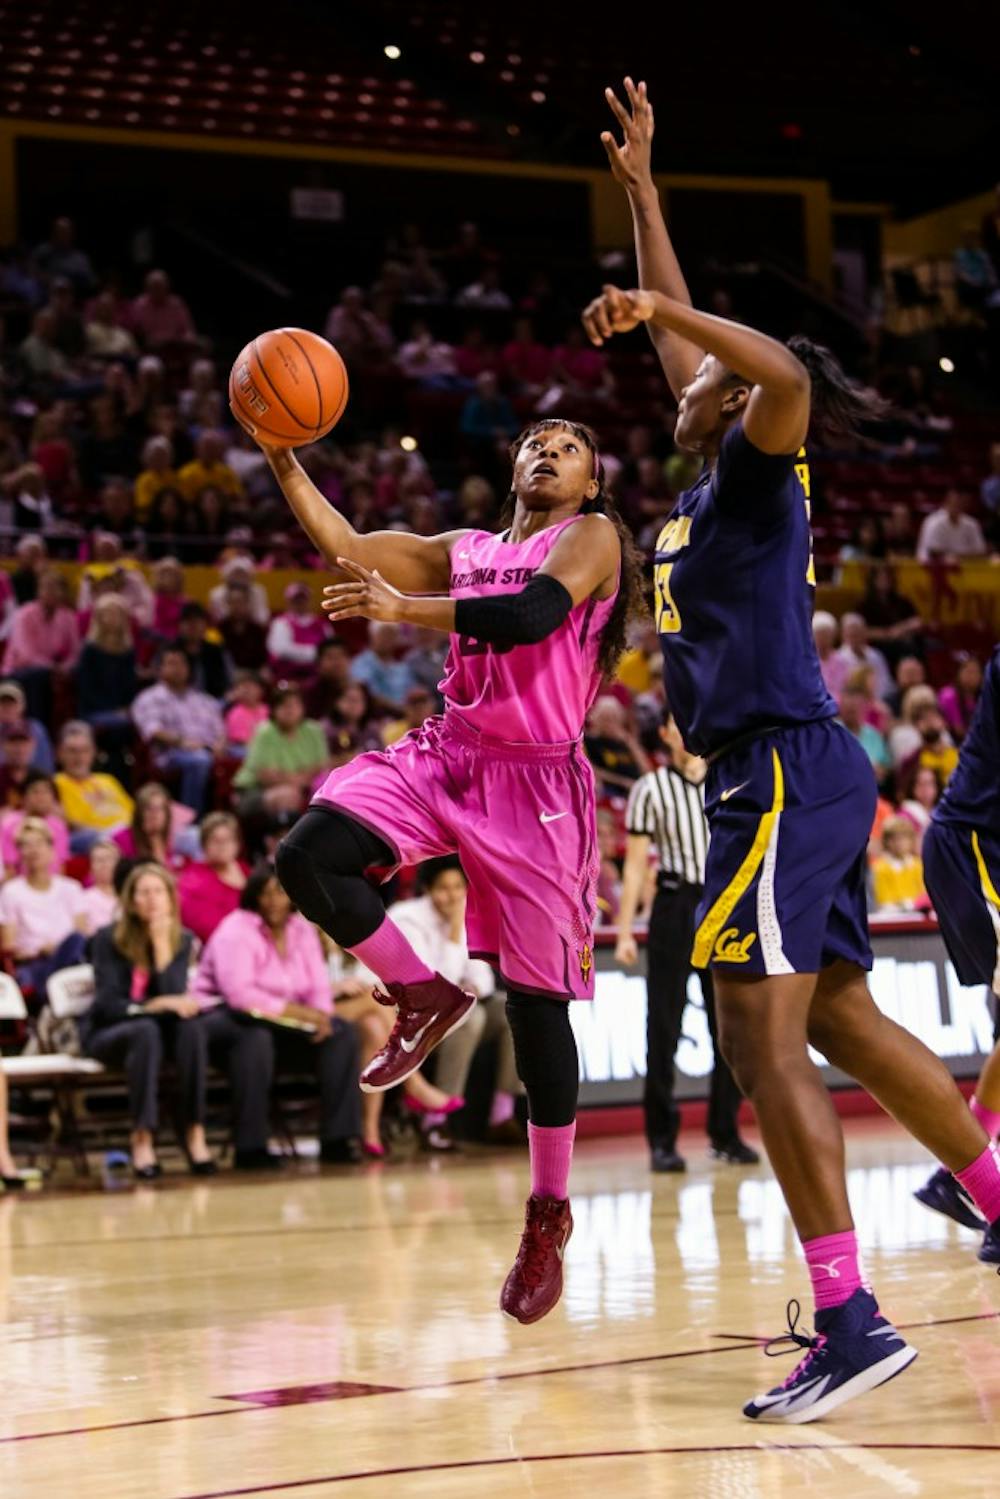 ASU junior guard Elisha Davis goes for a layup against Cal freshman guard Gabby Greene at the ASU
vs. Cal women’s basketball game at Wells Fargo Arena on Feb. 8, 2015. The Sun Devils would be stunned by a late shot by the Golden Bears losing 50-49. (Daniel Kwon/The State Press)